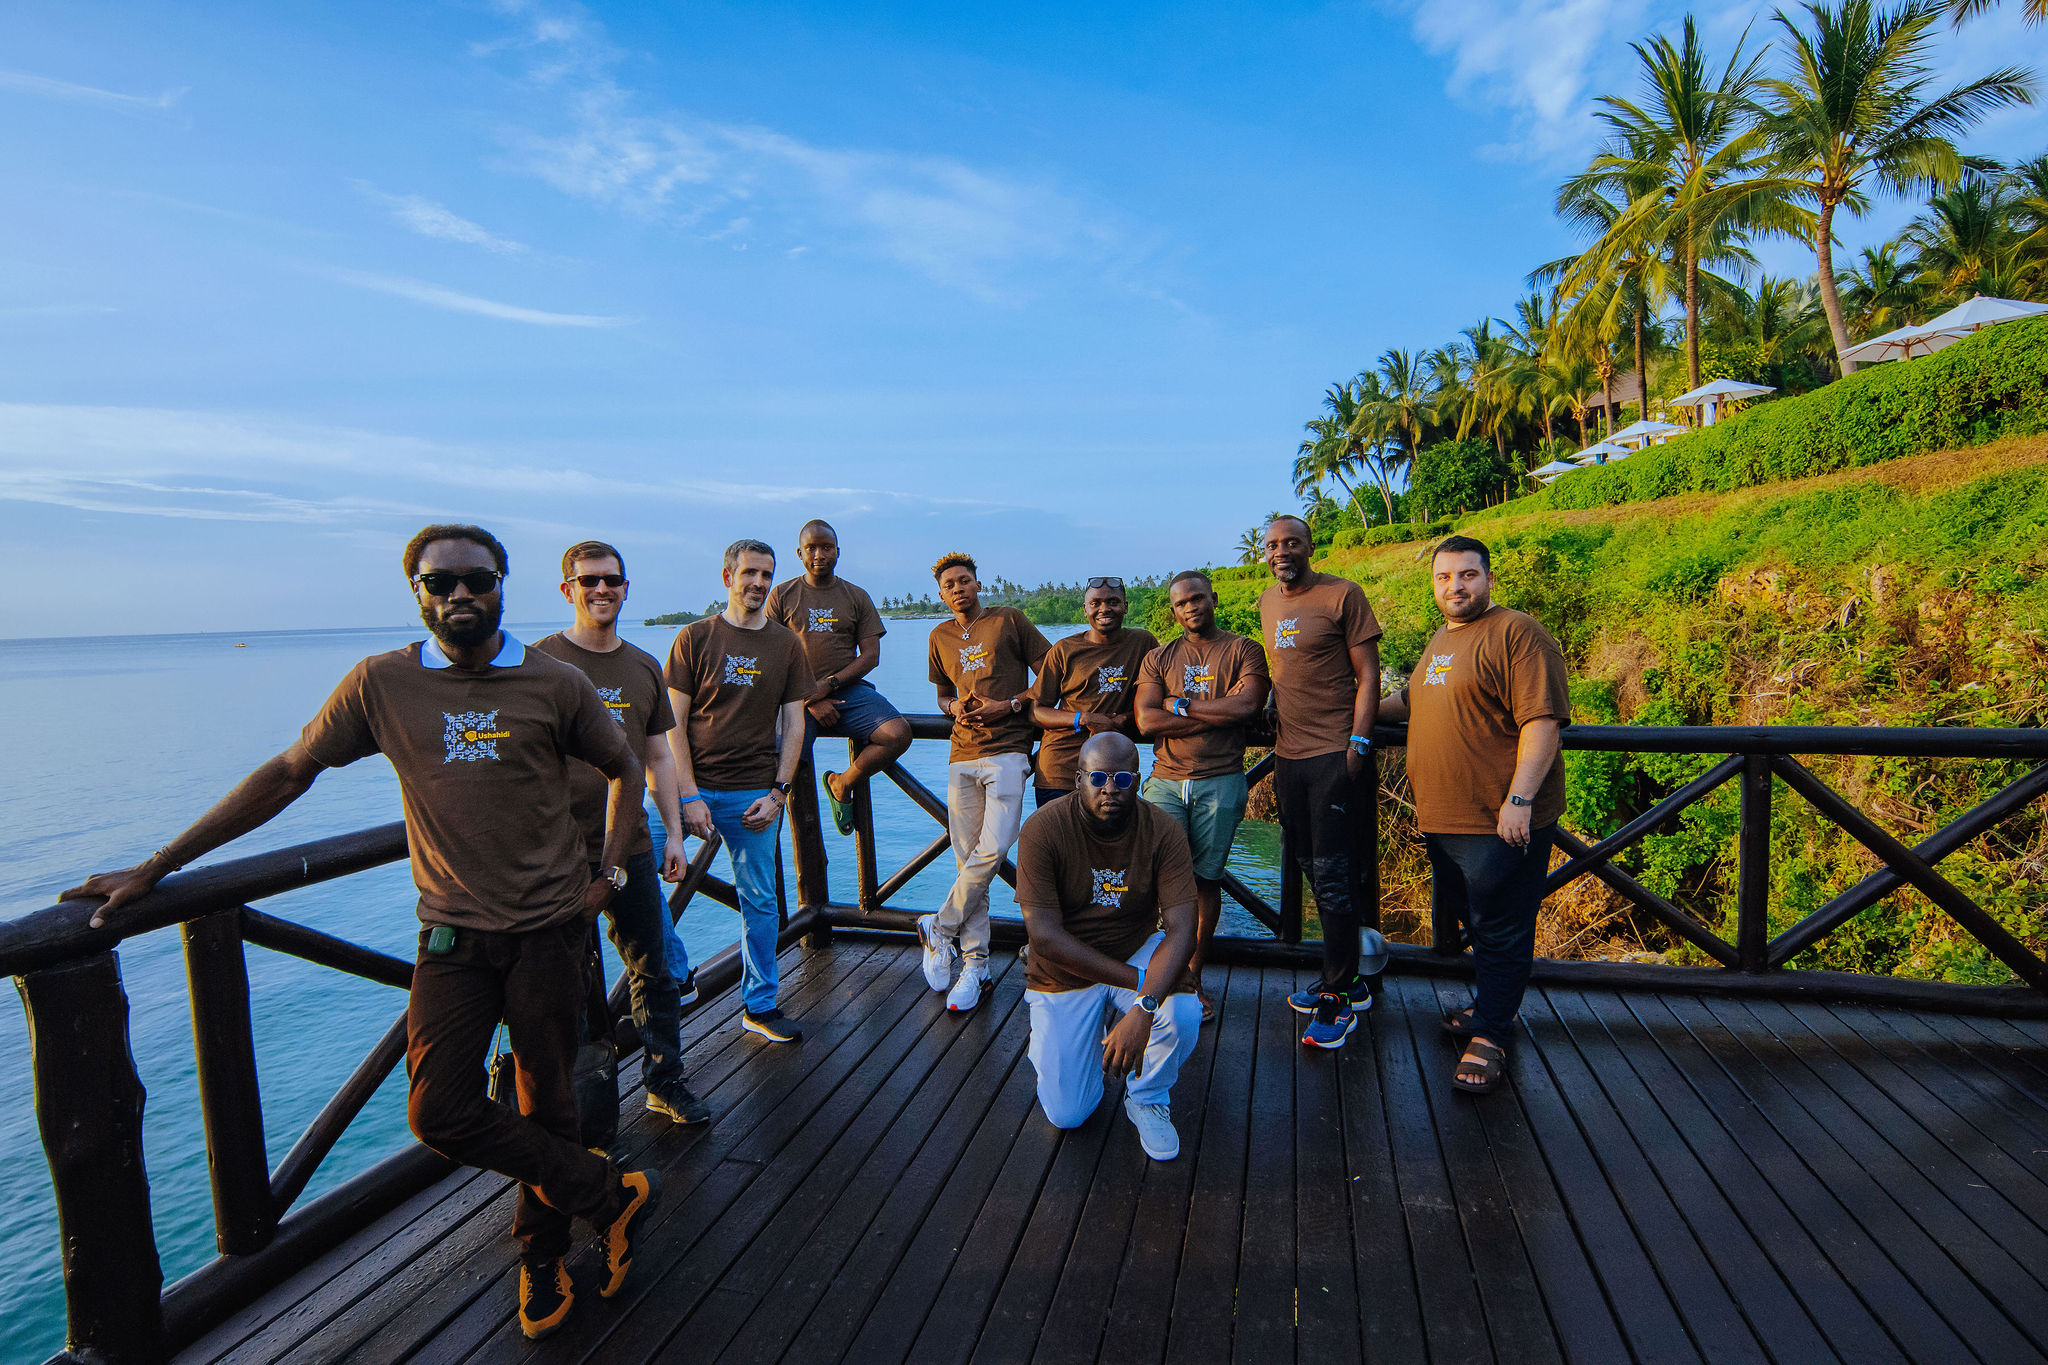 10 men posing for a photo on a deck by the ocean